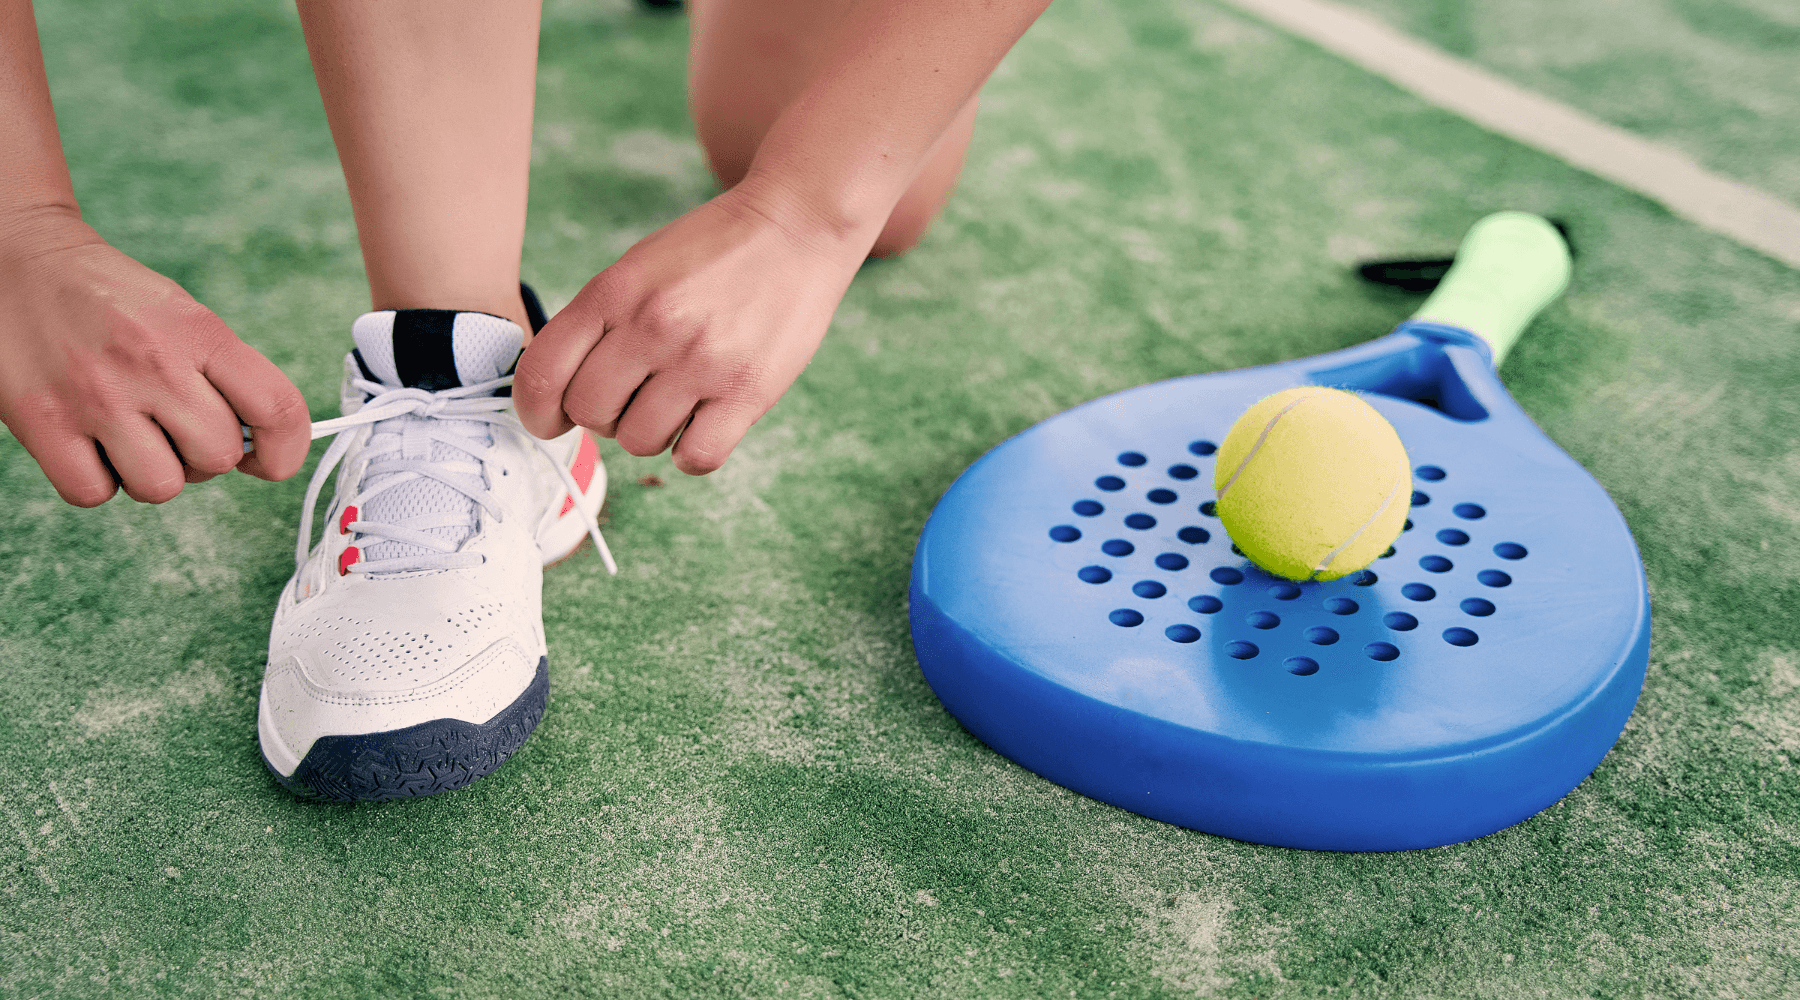 Padel Shoes Vs. Tennis Shoes: The Ultimate Guide